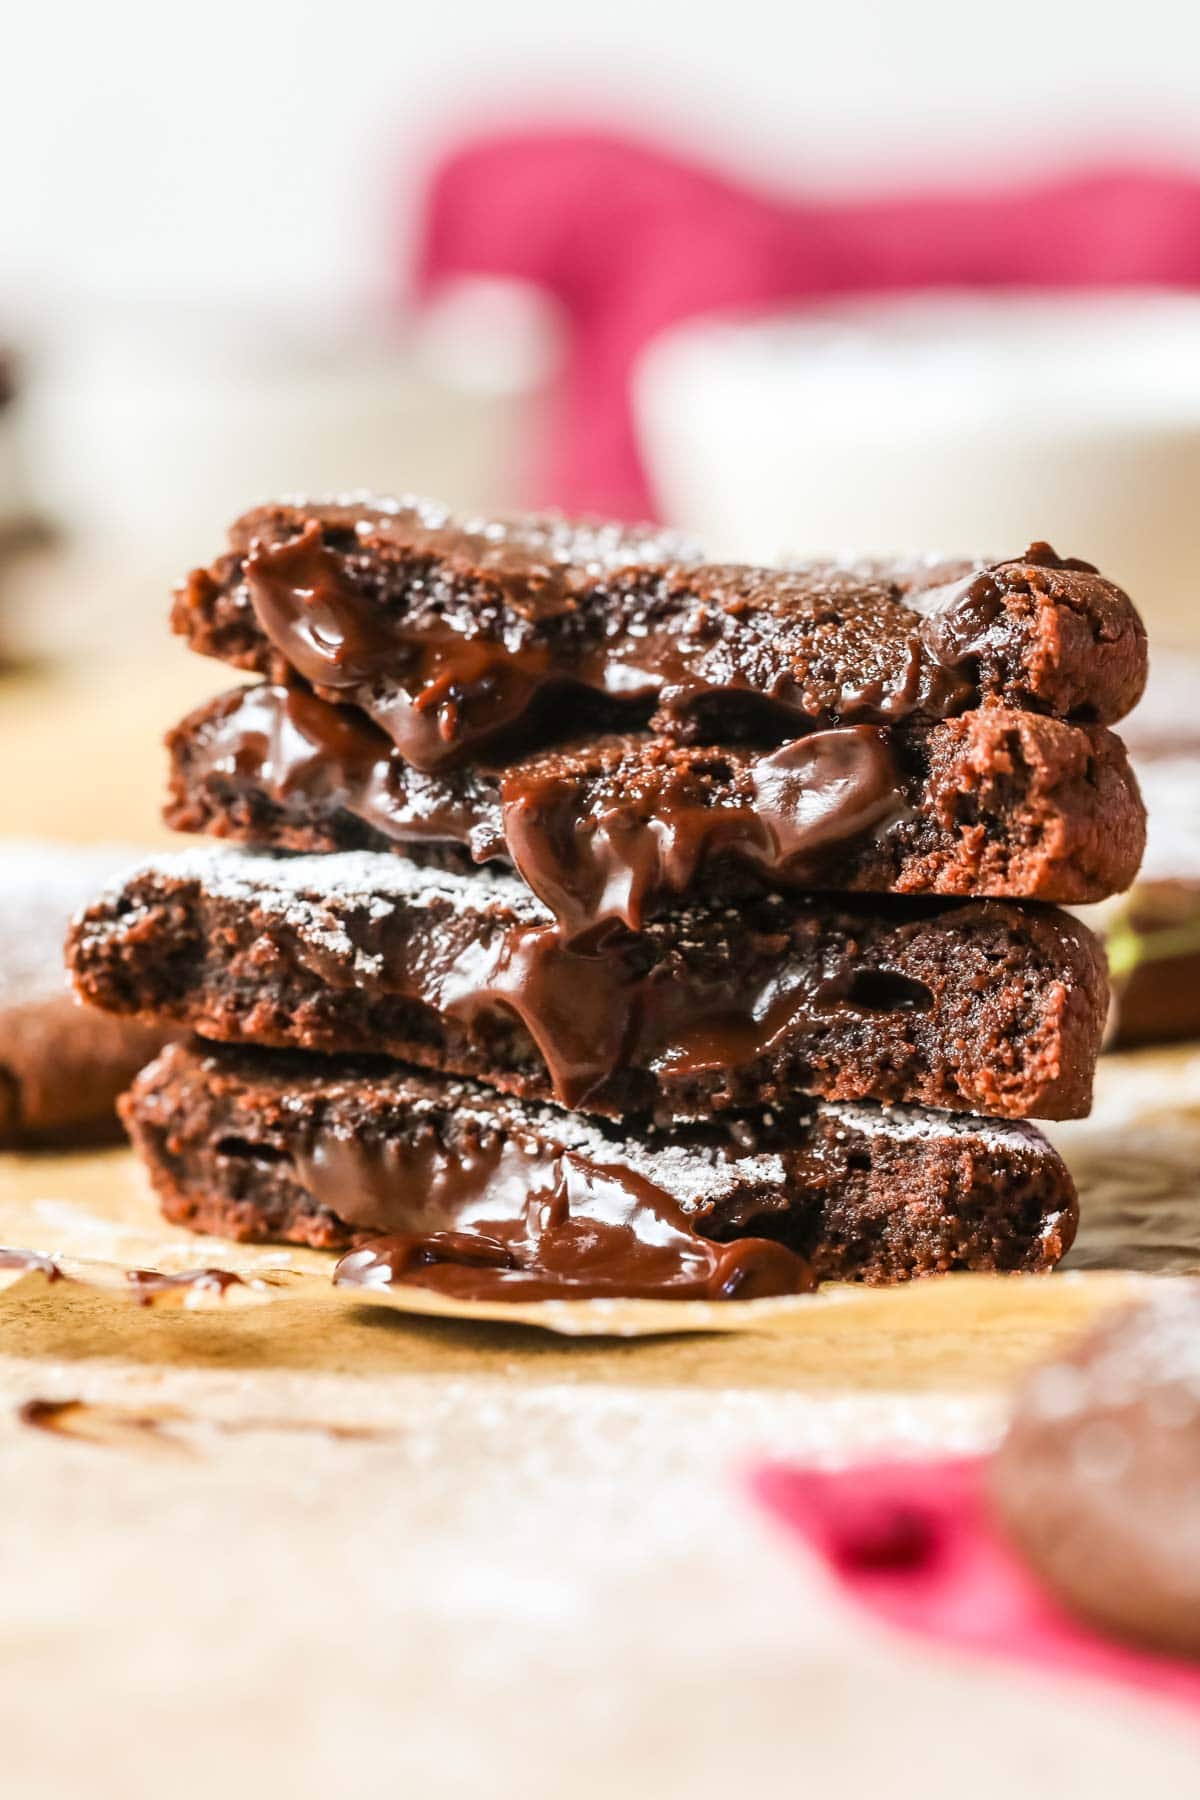 Stacked halves of chocolate cookies with molten ganache centers.